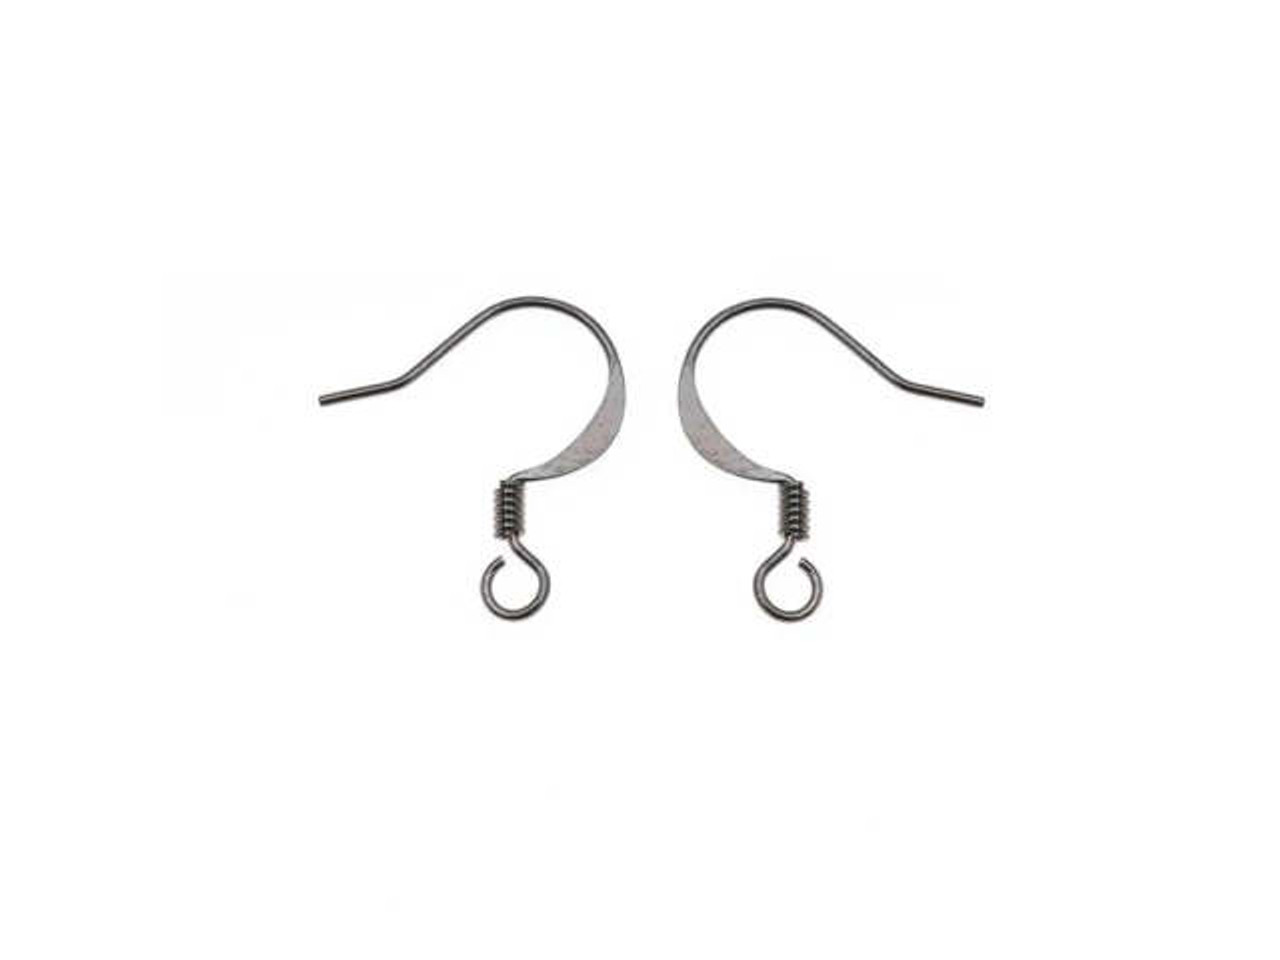 Earring Findings, Long Earring Hooks 25mm, Gold Plated (25 Pairs)